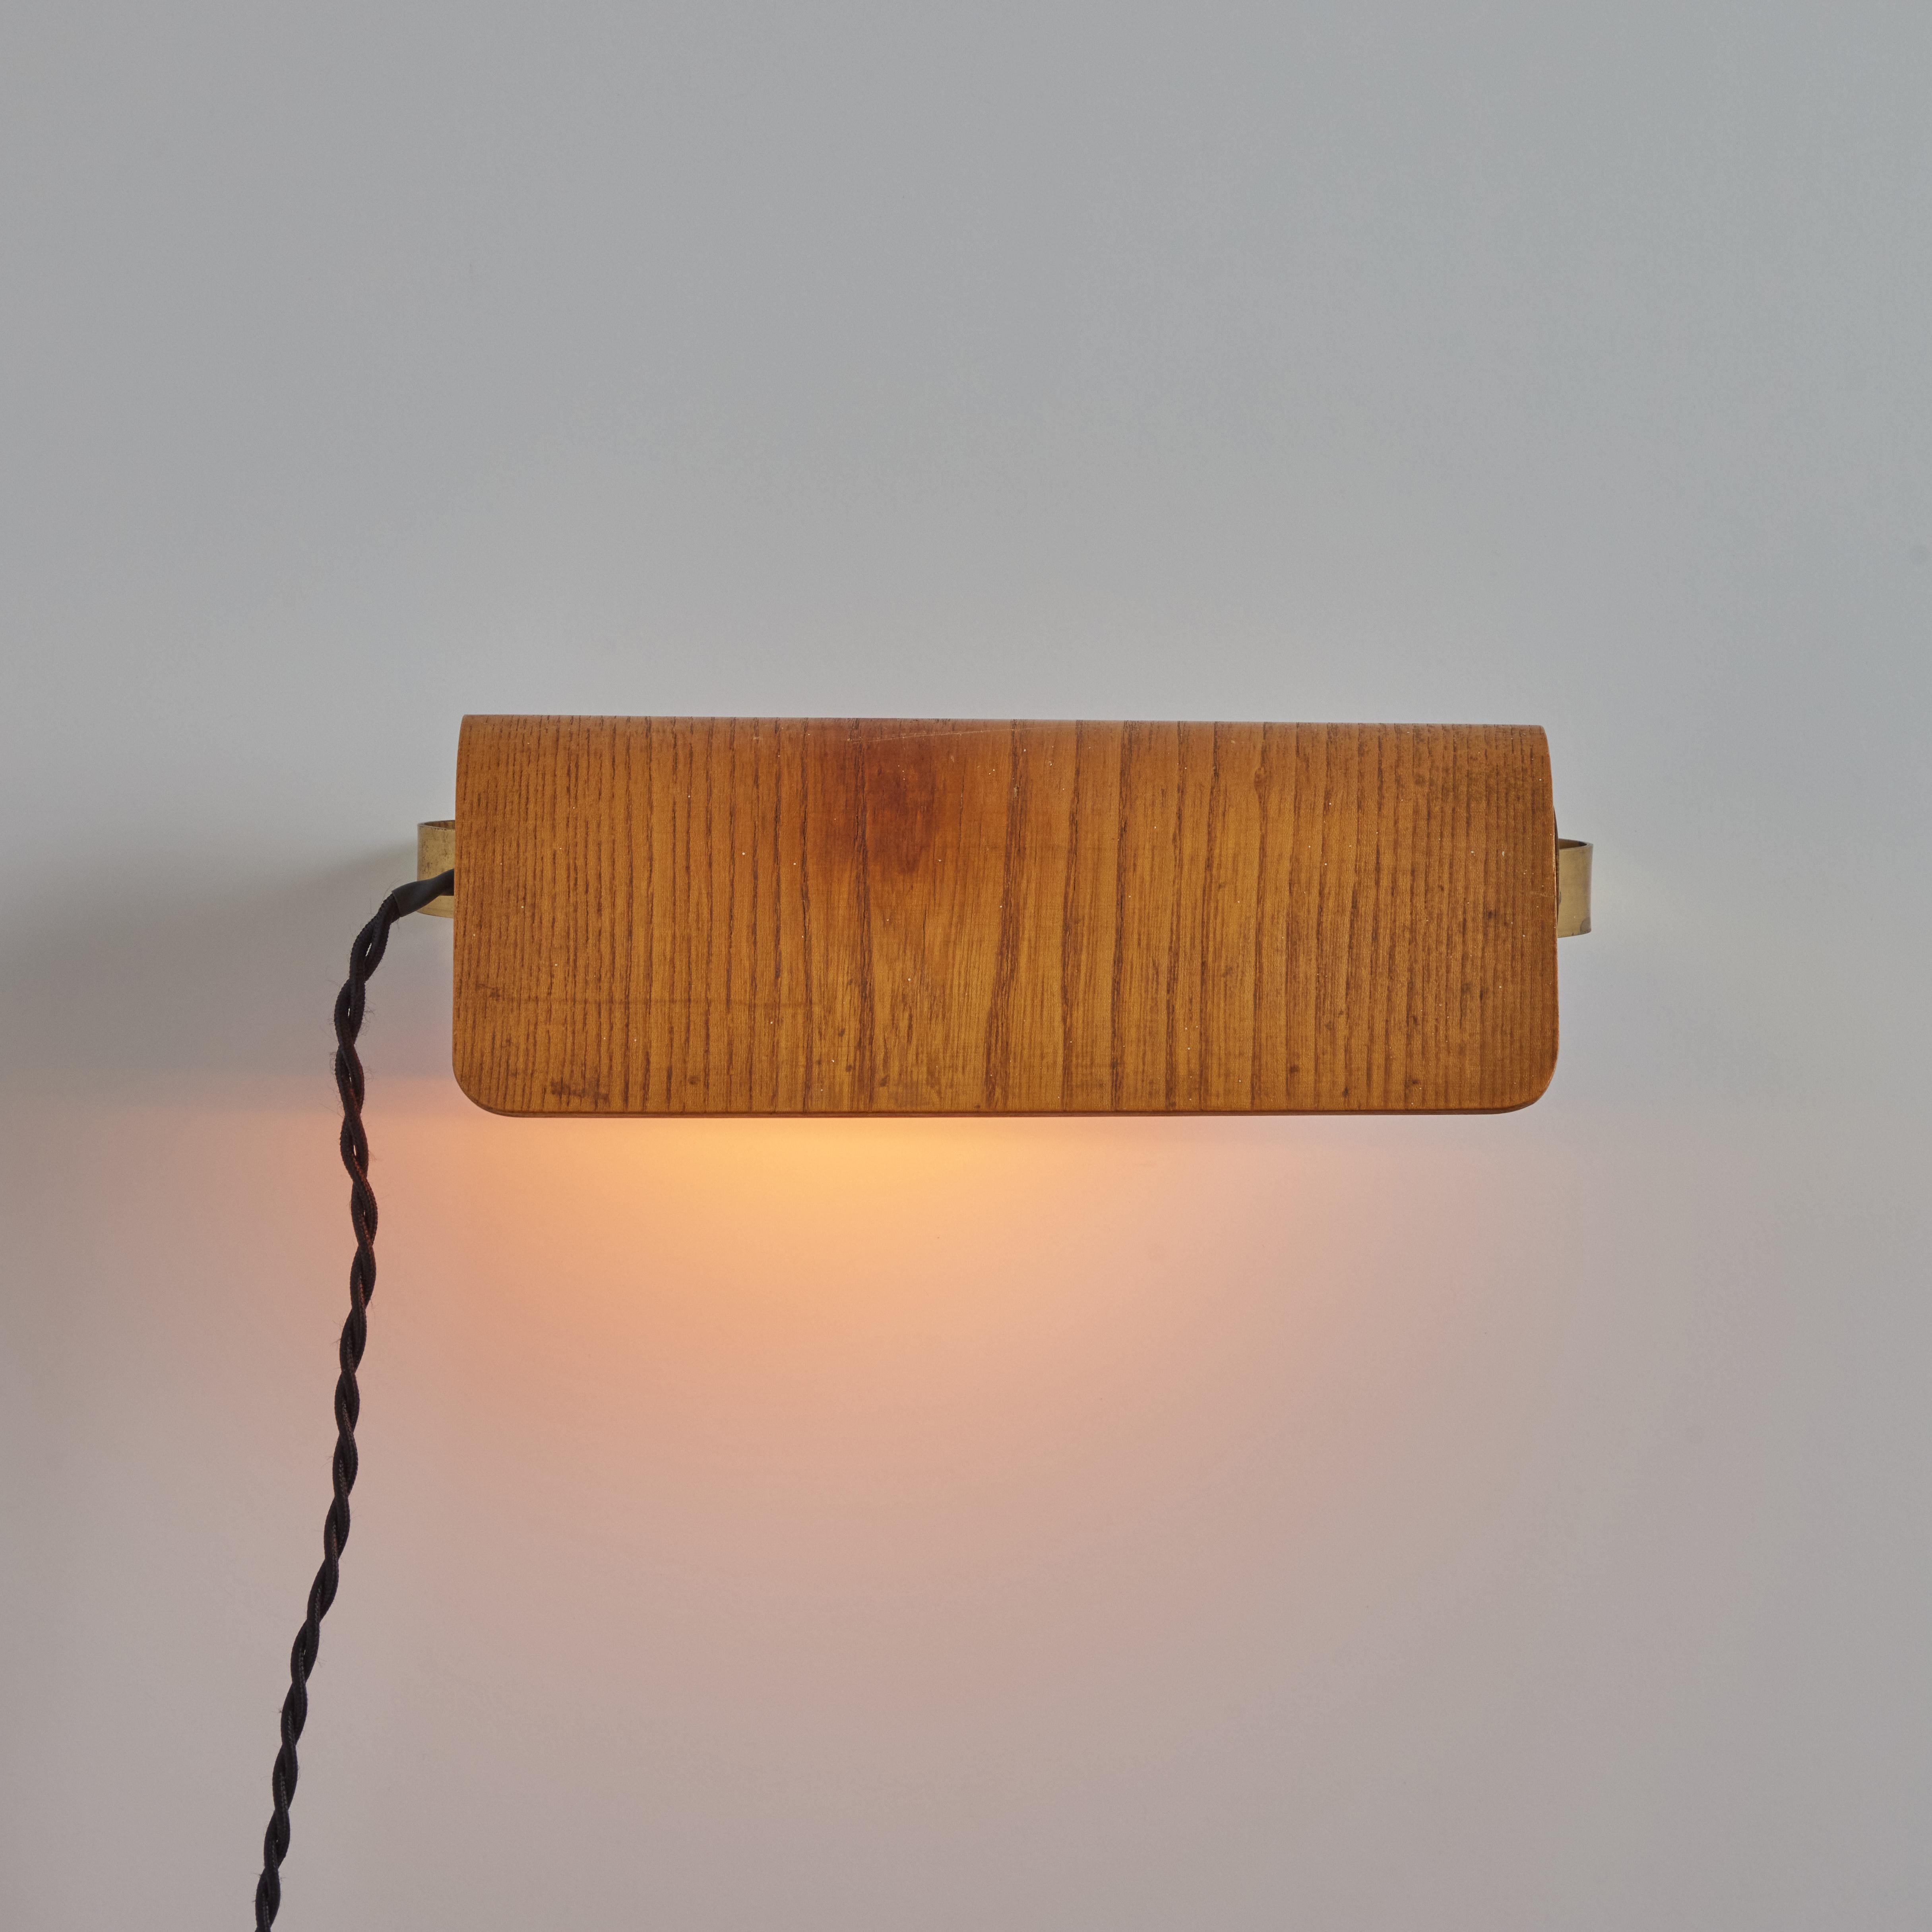 Scandinavian Modern Pair of 1960s Wood & Brass Wall Lamps Attributed to Hans-Agne Jakobsson For Sale